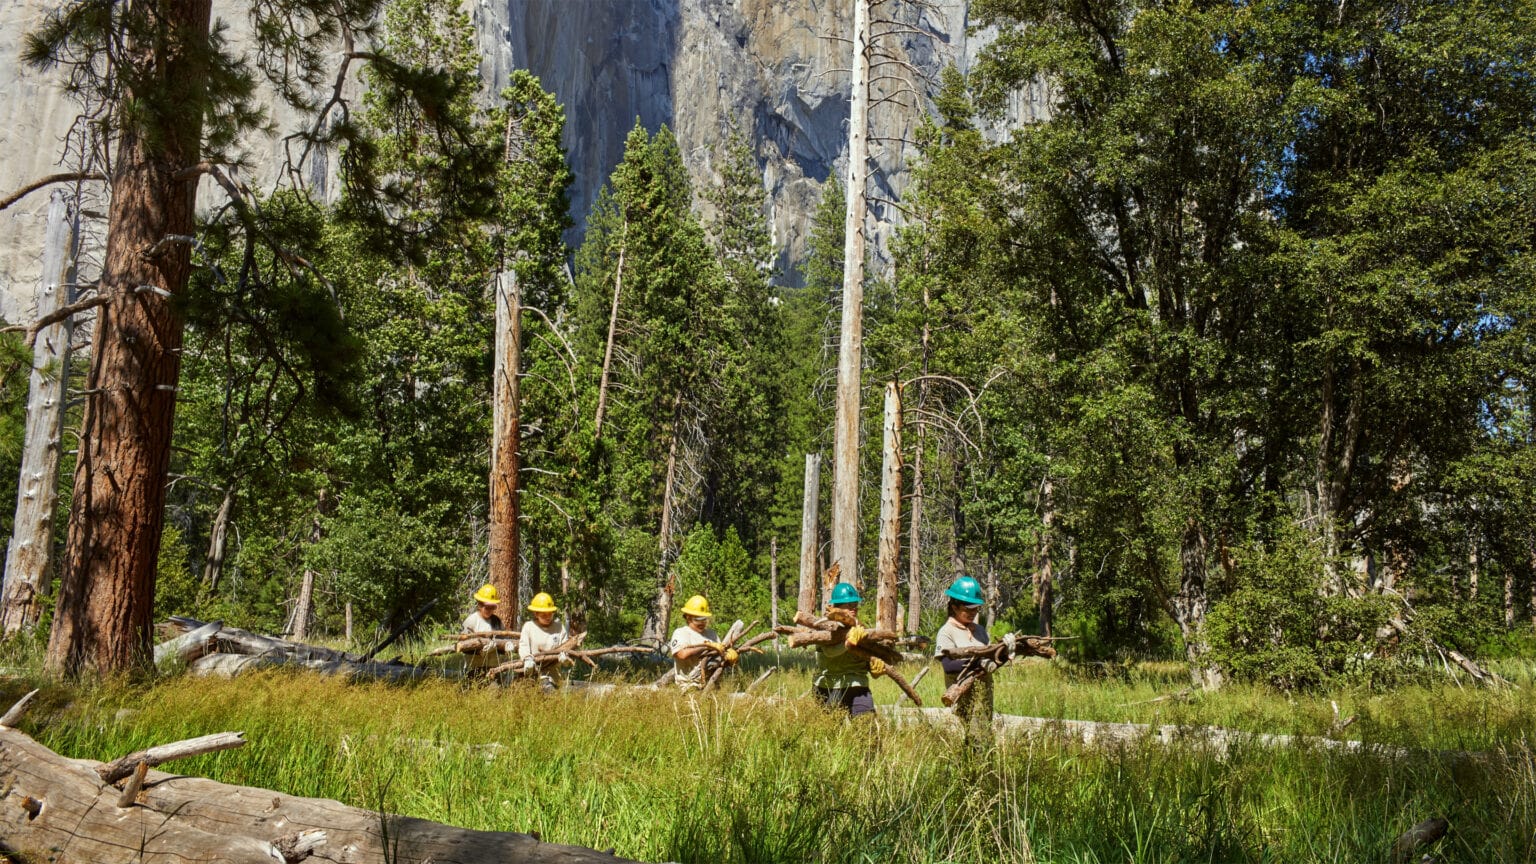 Young indigenous women work to preserve a scared black-oak grove at the base of El Capitan in Yosemite National Park.